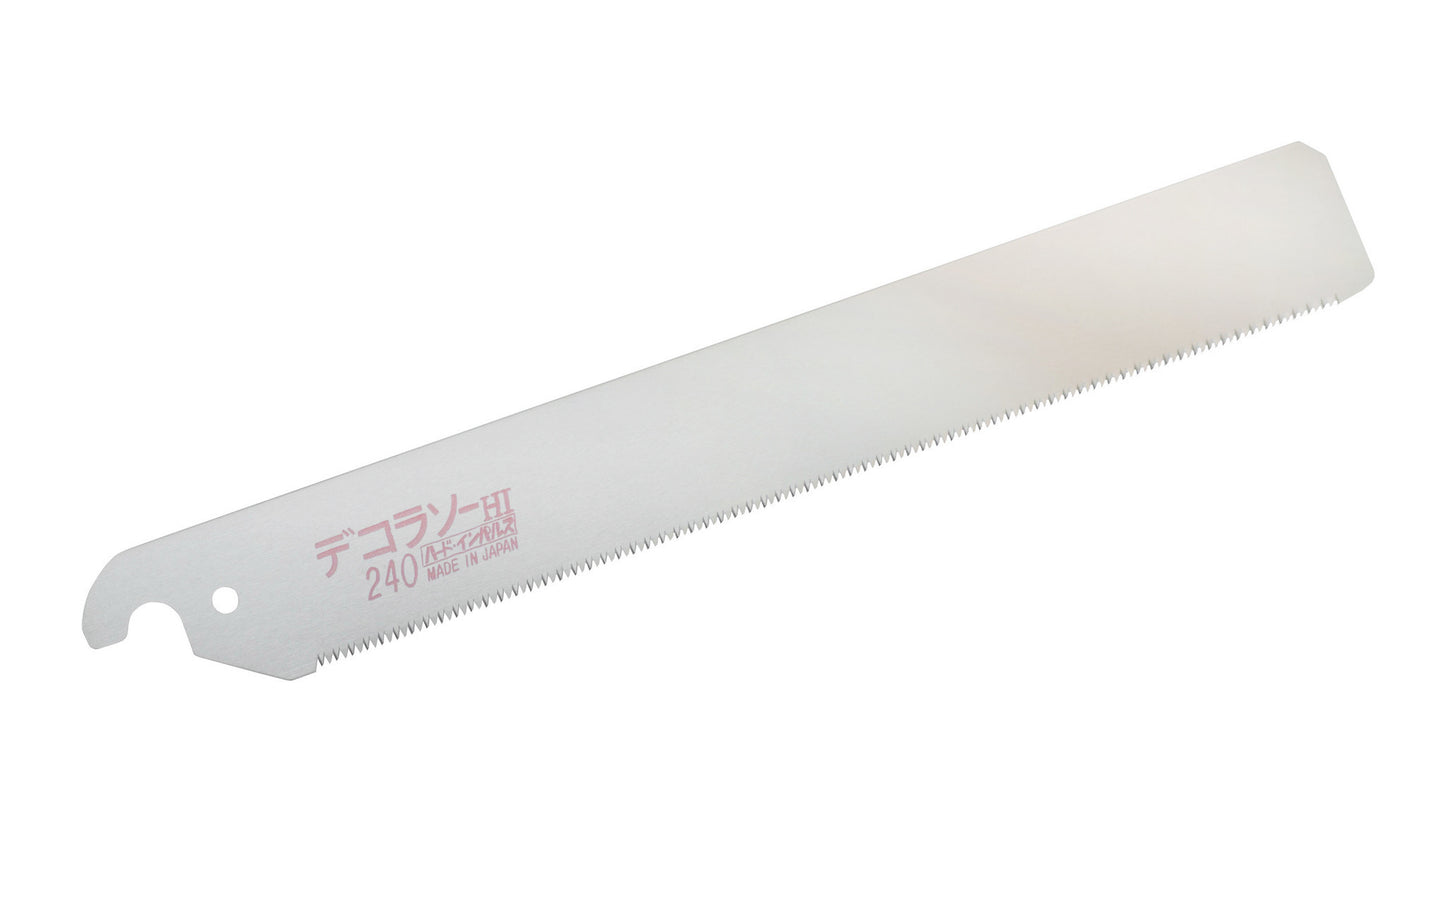 Replacement Blade for Japanese Z-Saw 240 mm "Dekora"